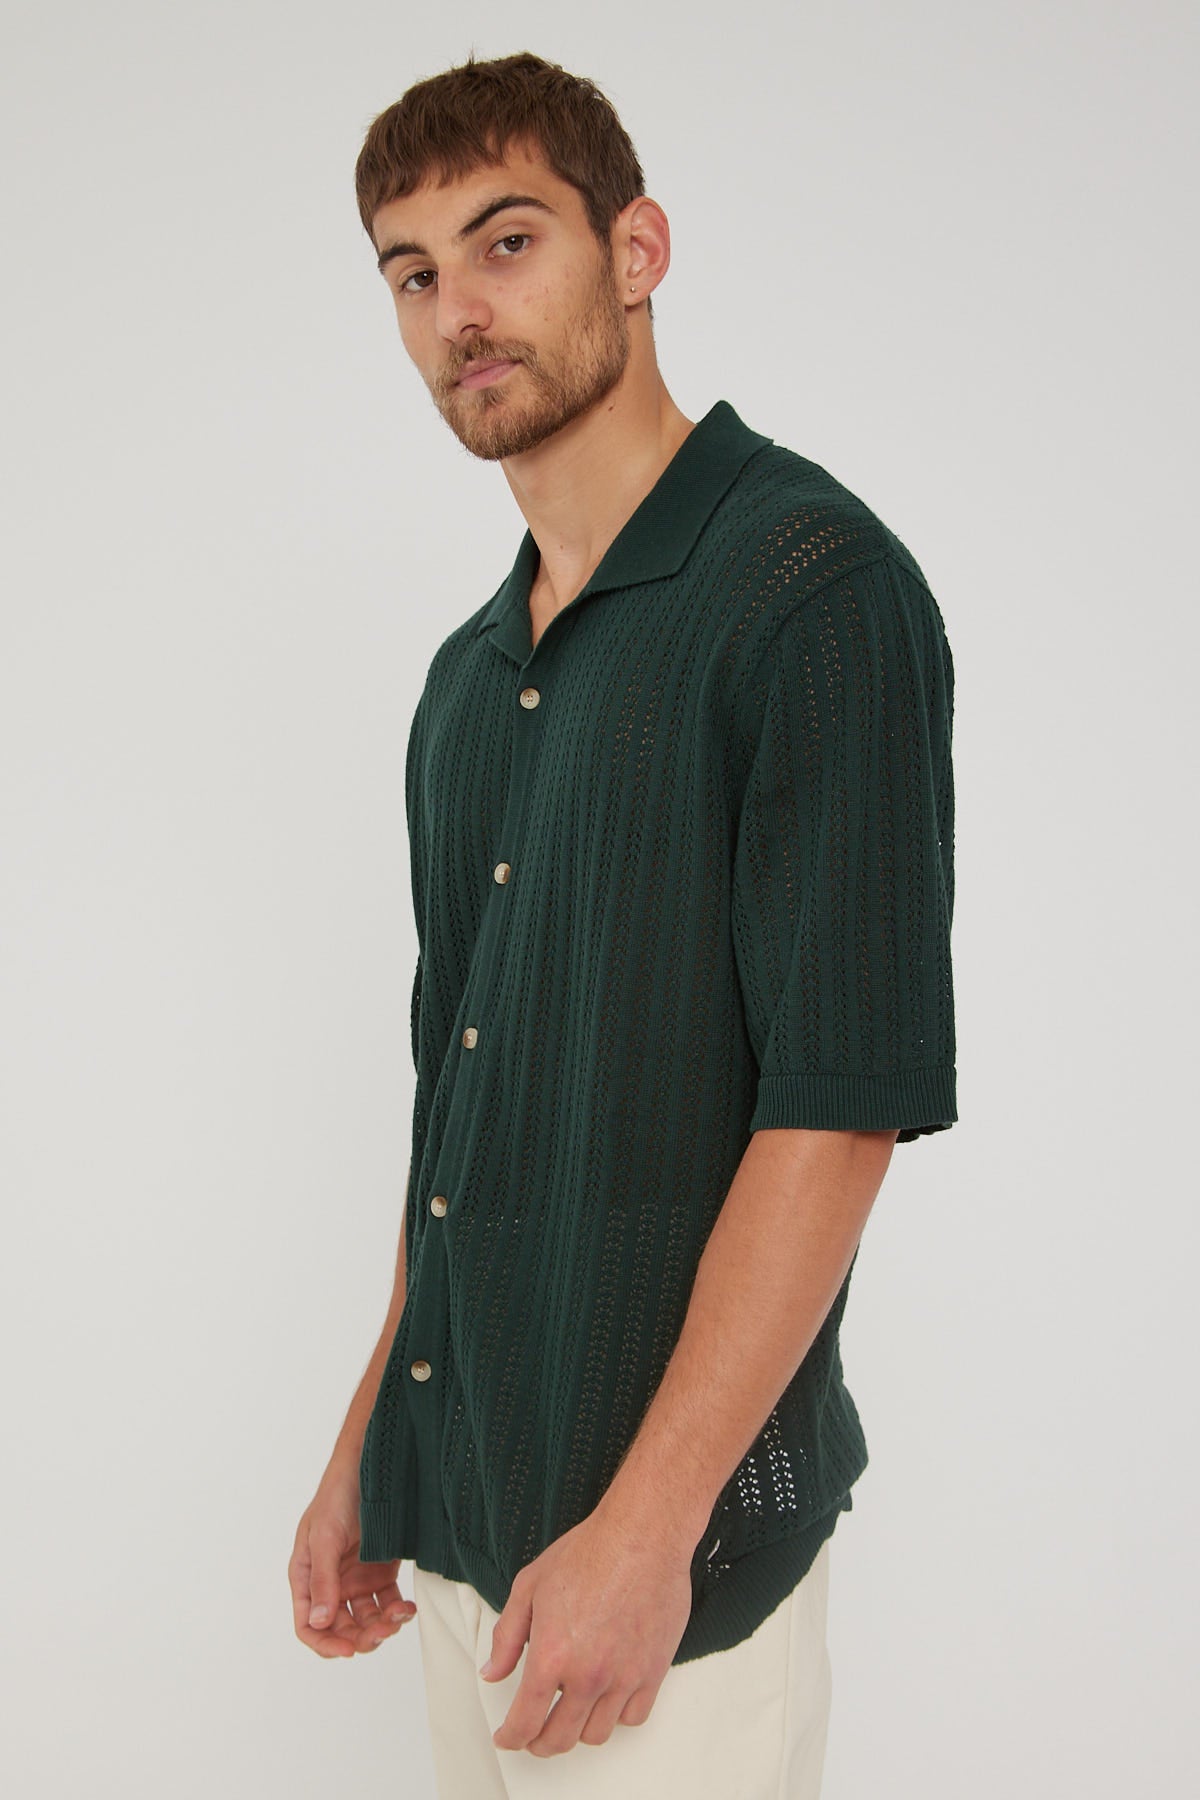 Rolla's Bowler Knit Shirt Thyme